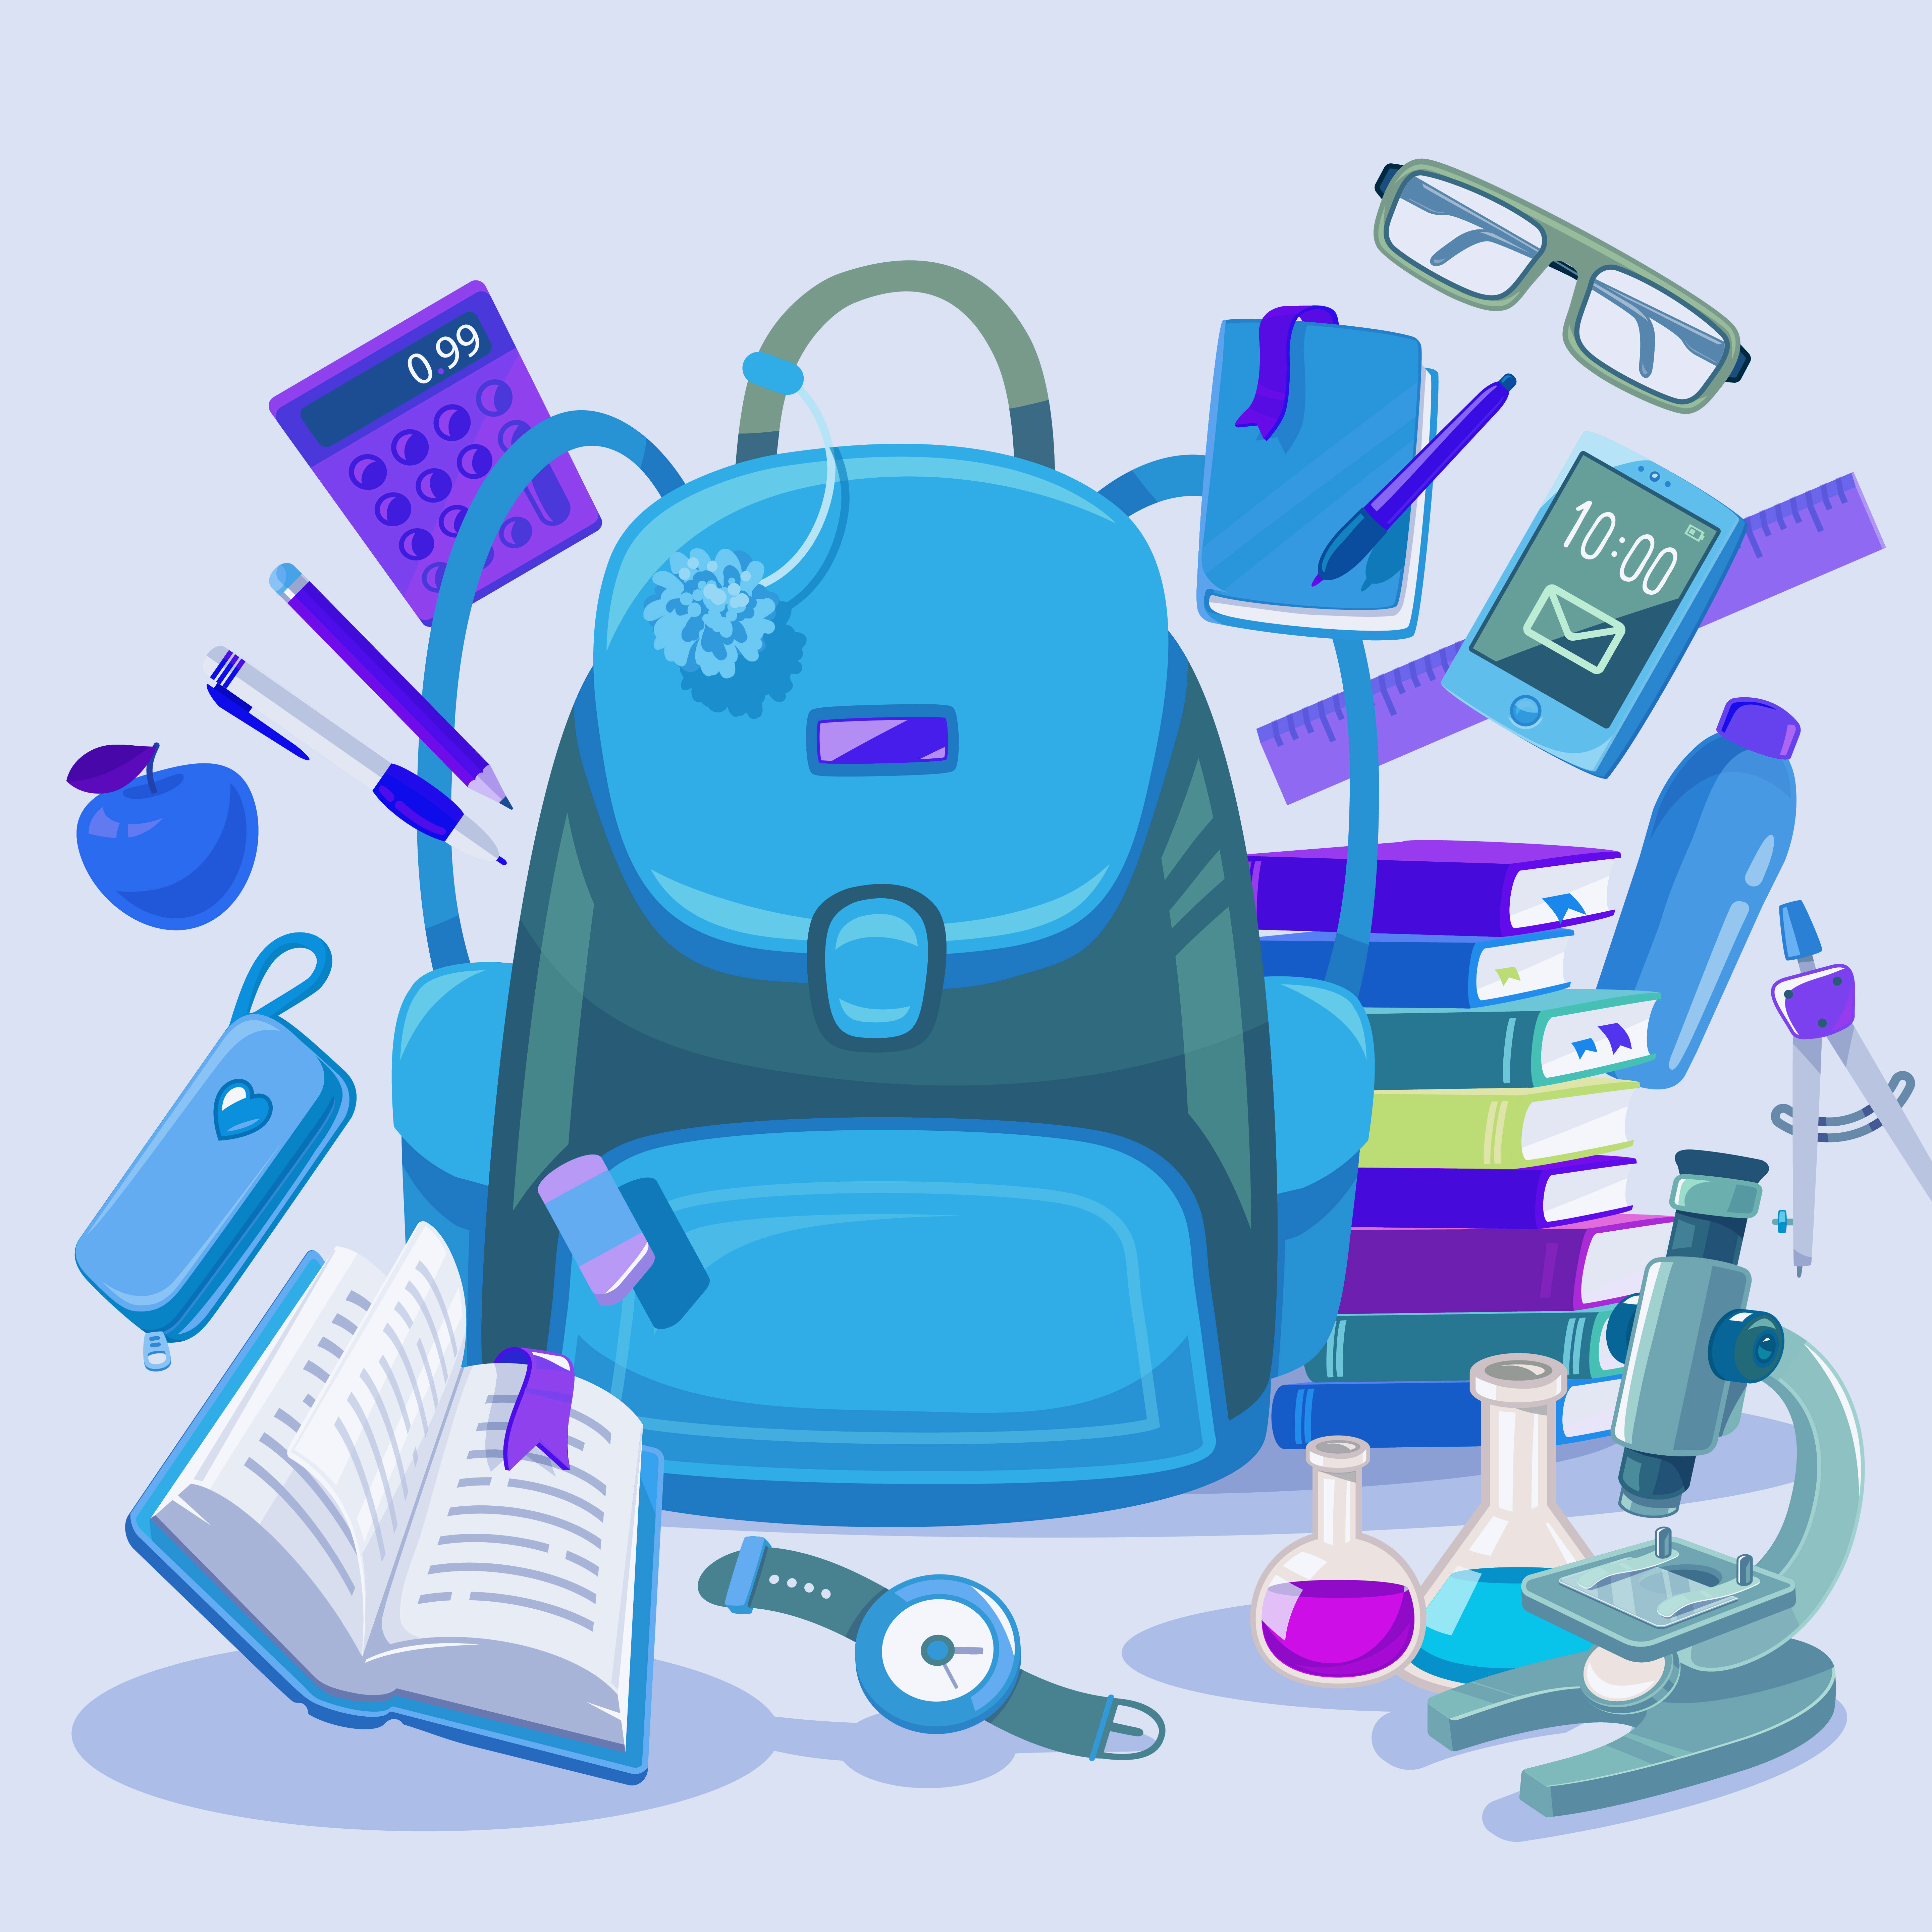 Vector colorful illustration of big girl pink backpack, pile of books, phone, microscope, apple, pen and other many school supplies on light background. Art design for web, site, advertising, banner, poster, brochure, board